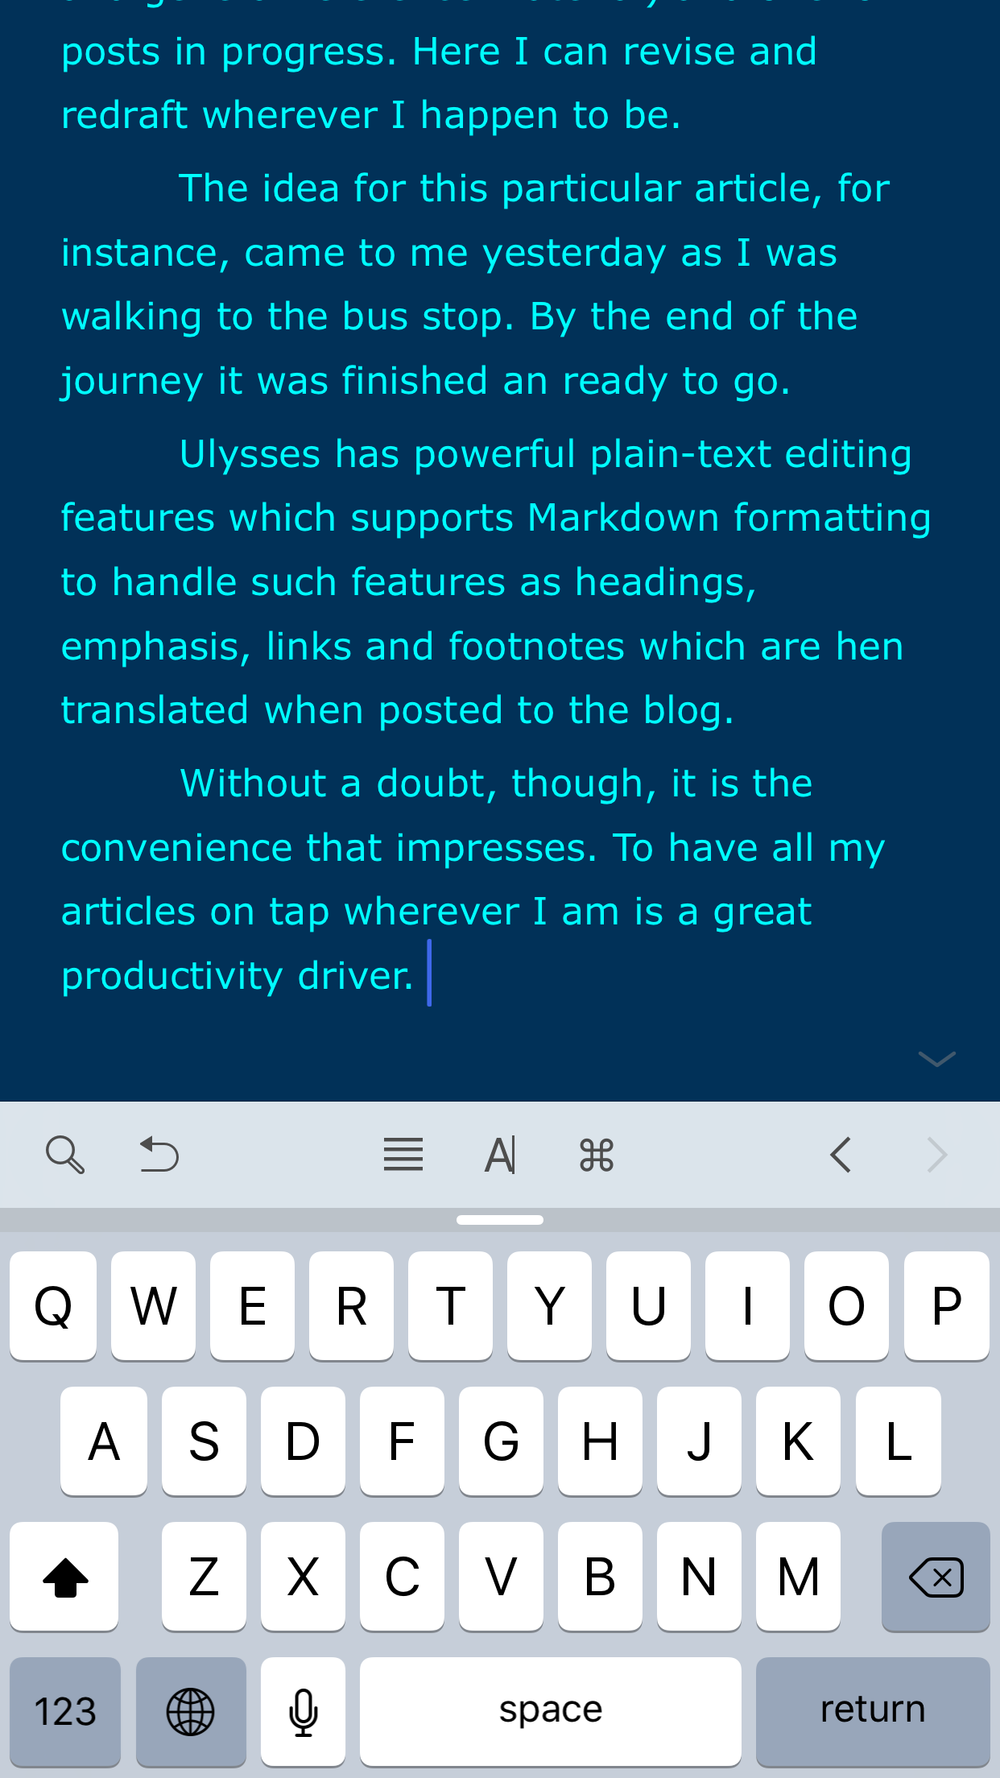  Ulysses for iPhone: The jewel in the crown, ensuring full compatibility between Macs, iPads and phones. Edit your test wherever you are 